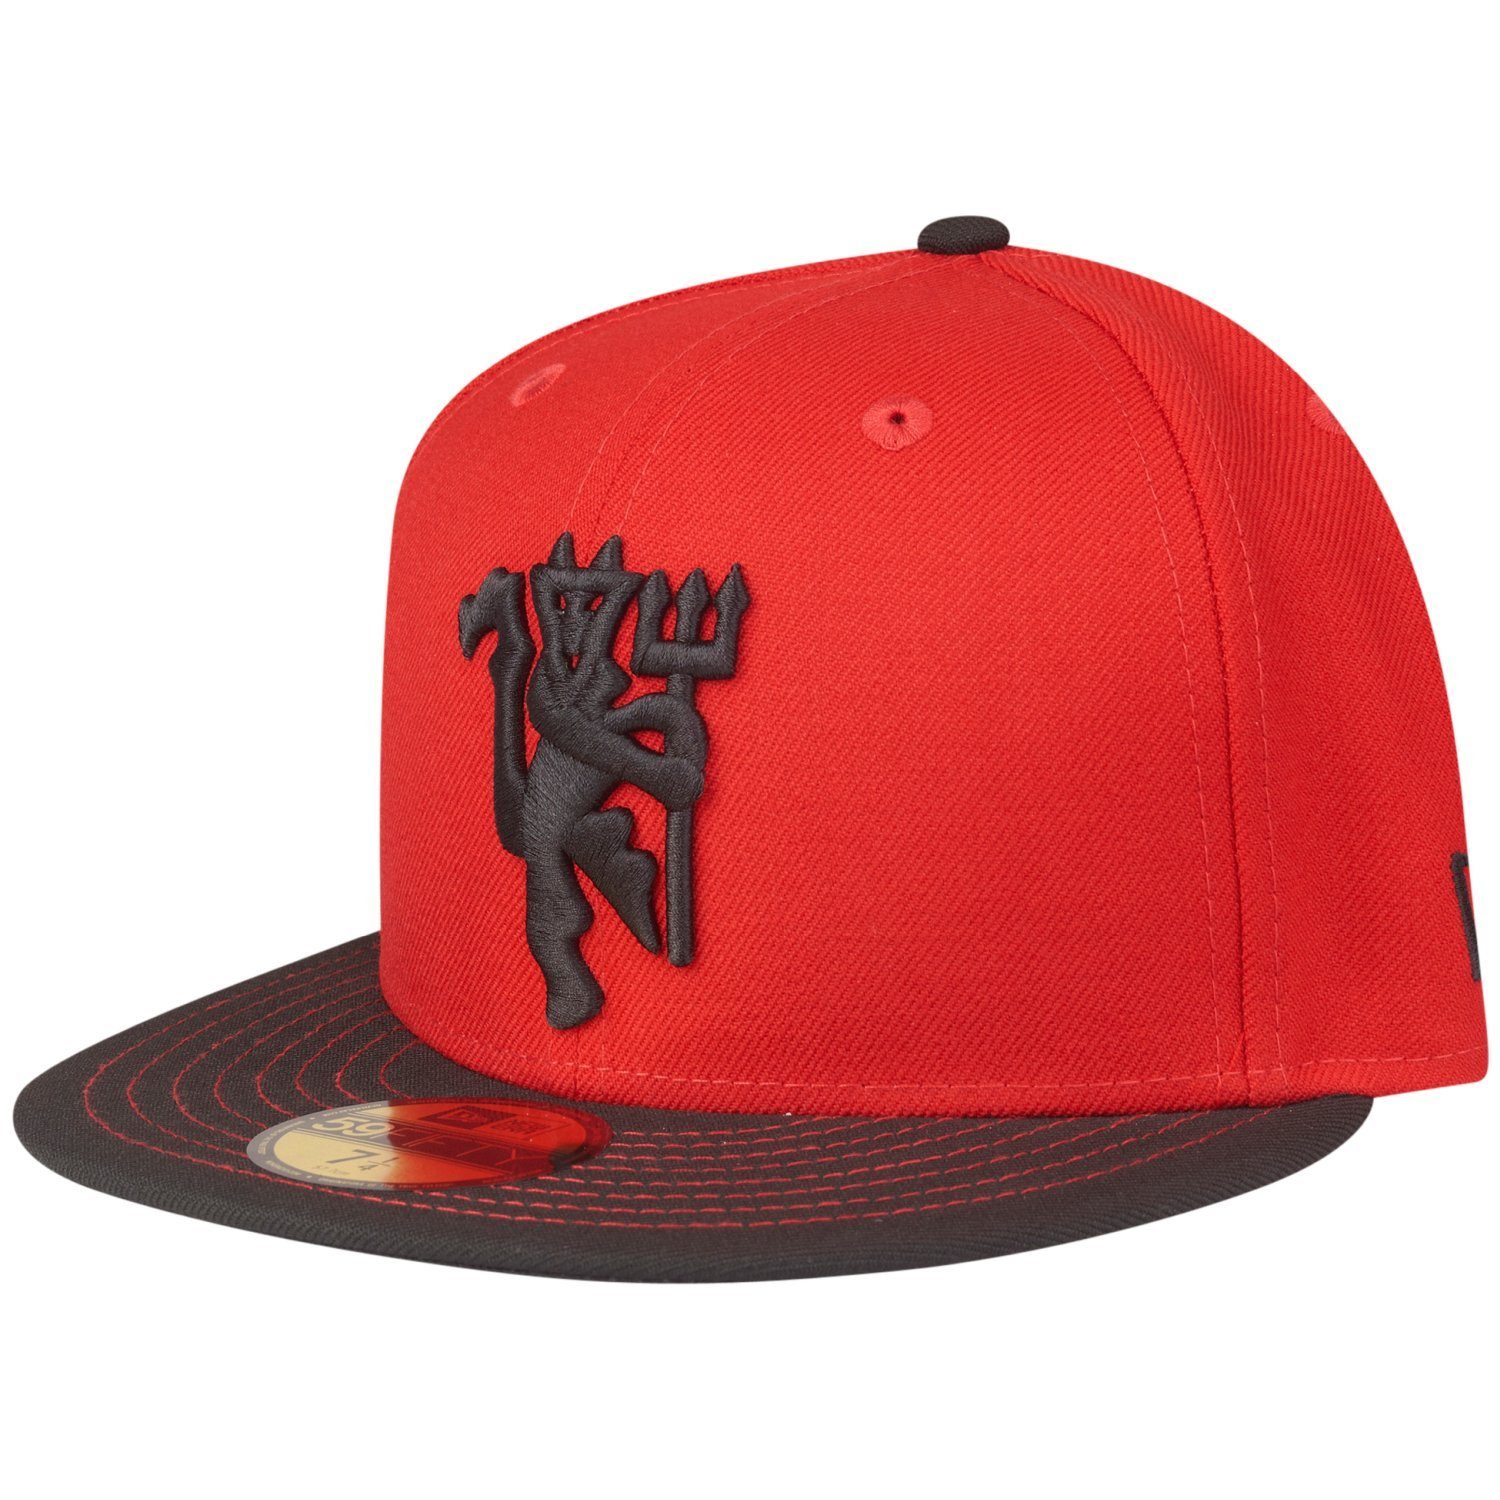 New Manchester Fitted DEVIL Era 59Fifty Cap United